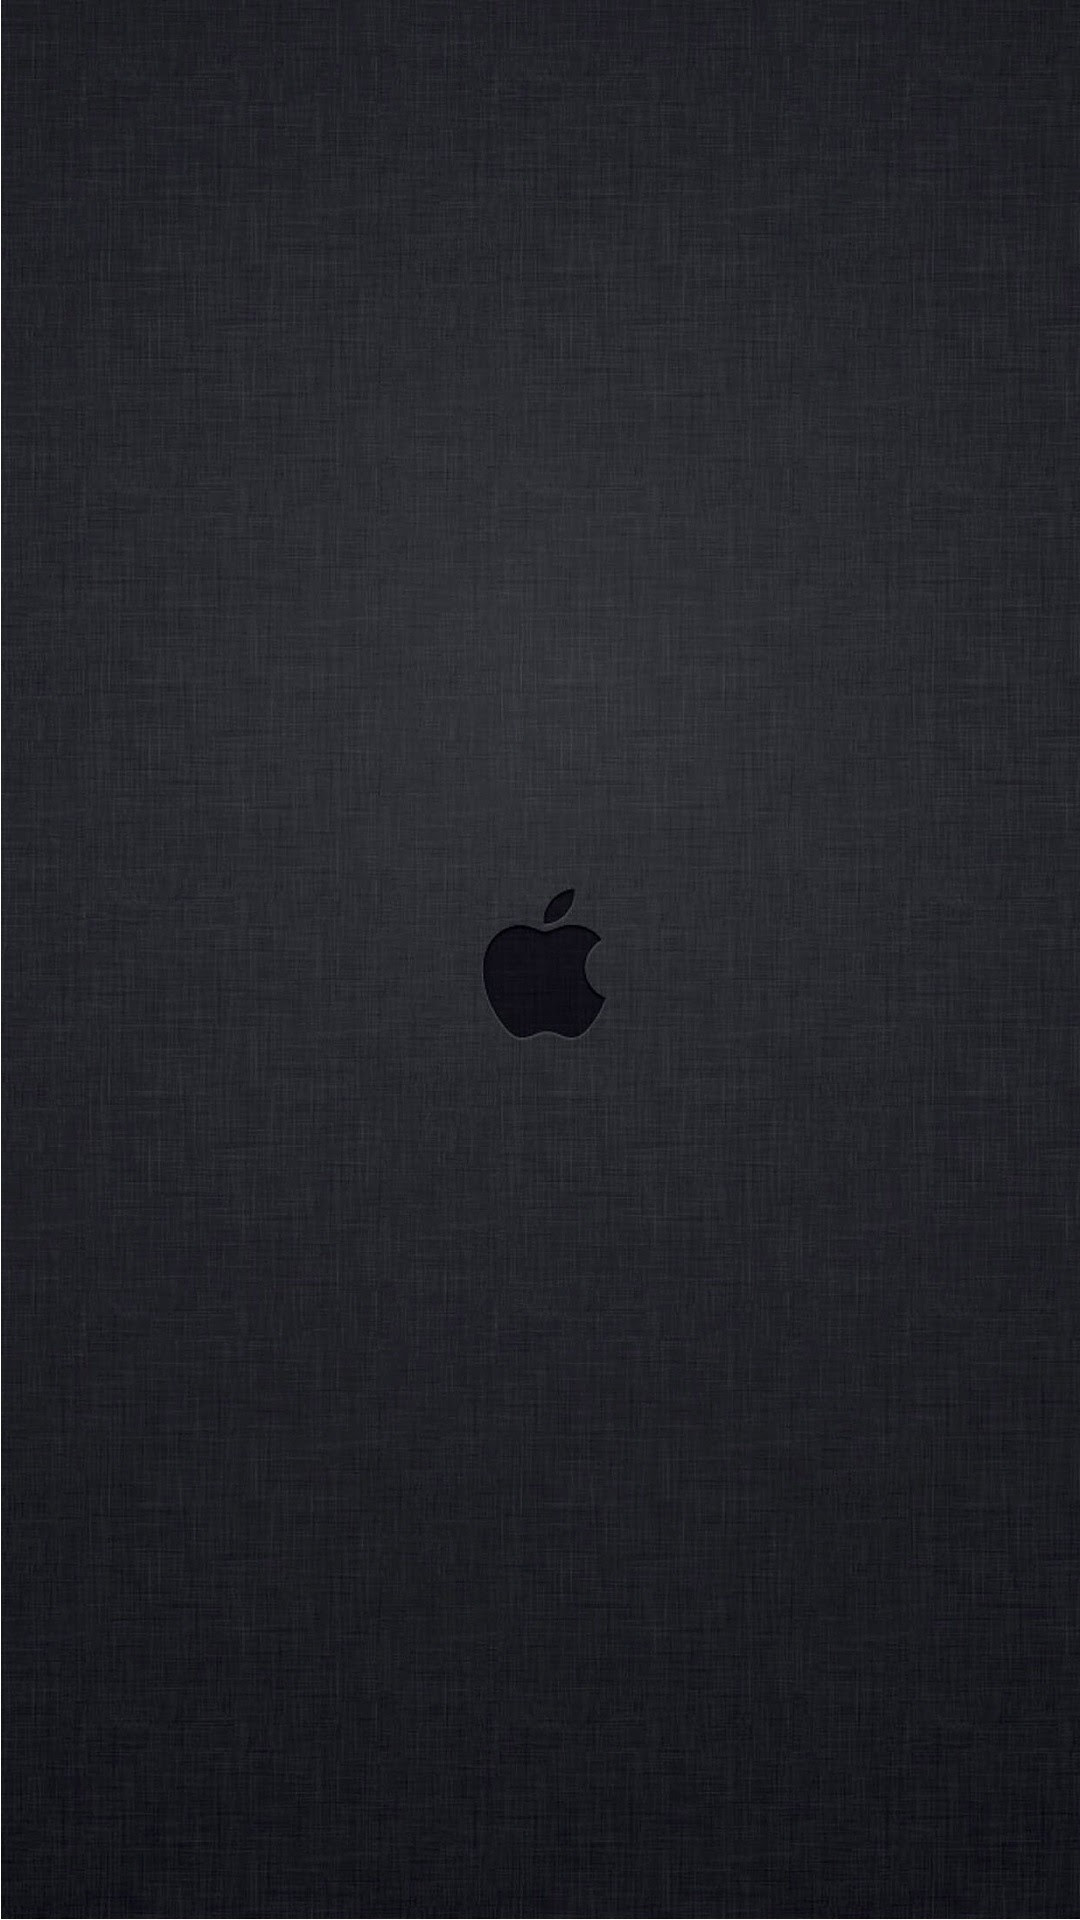 Apple Logo Wallpaper Black And White Wallpaper Hd For Android